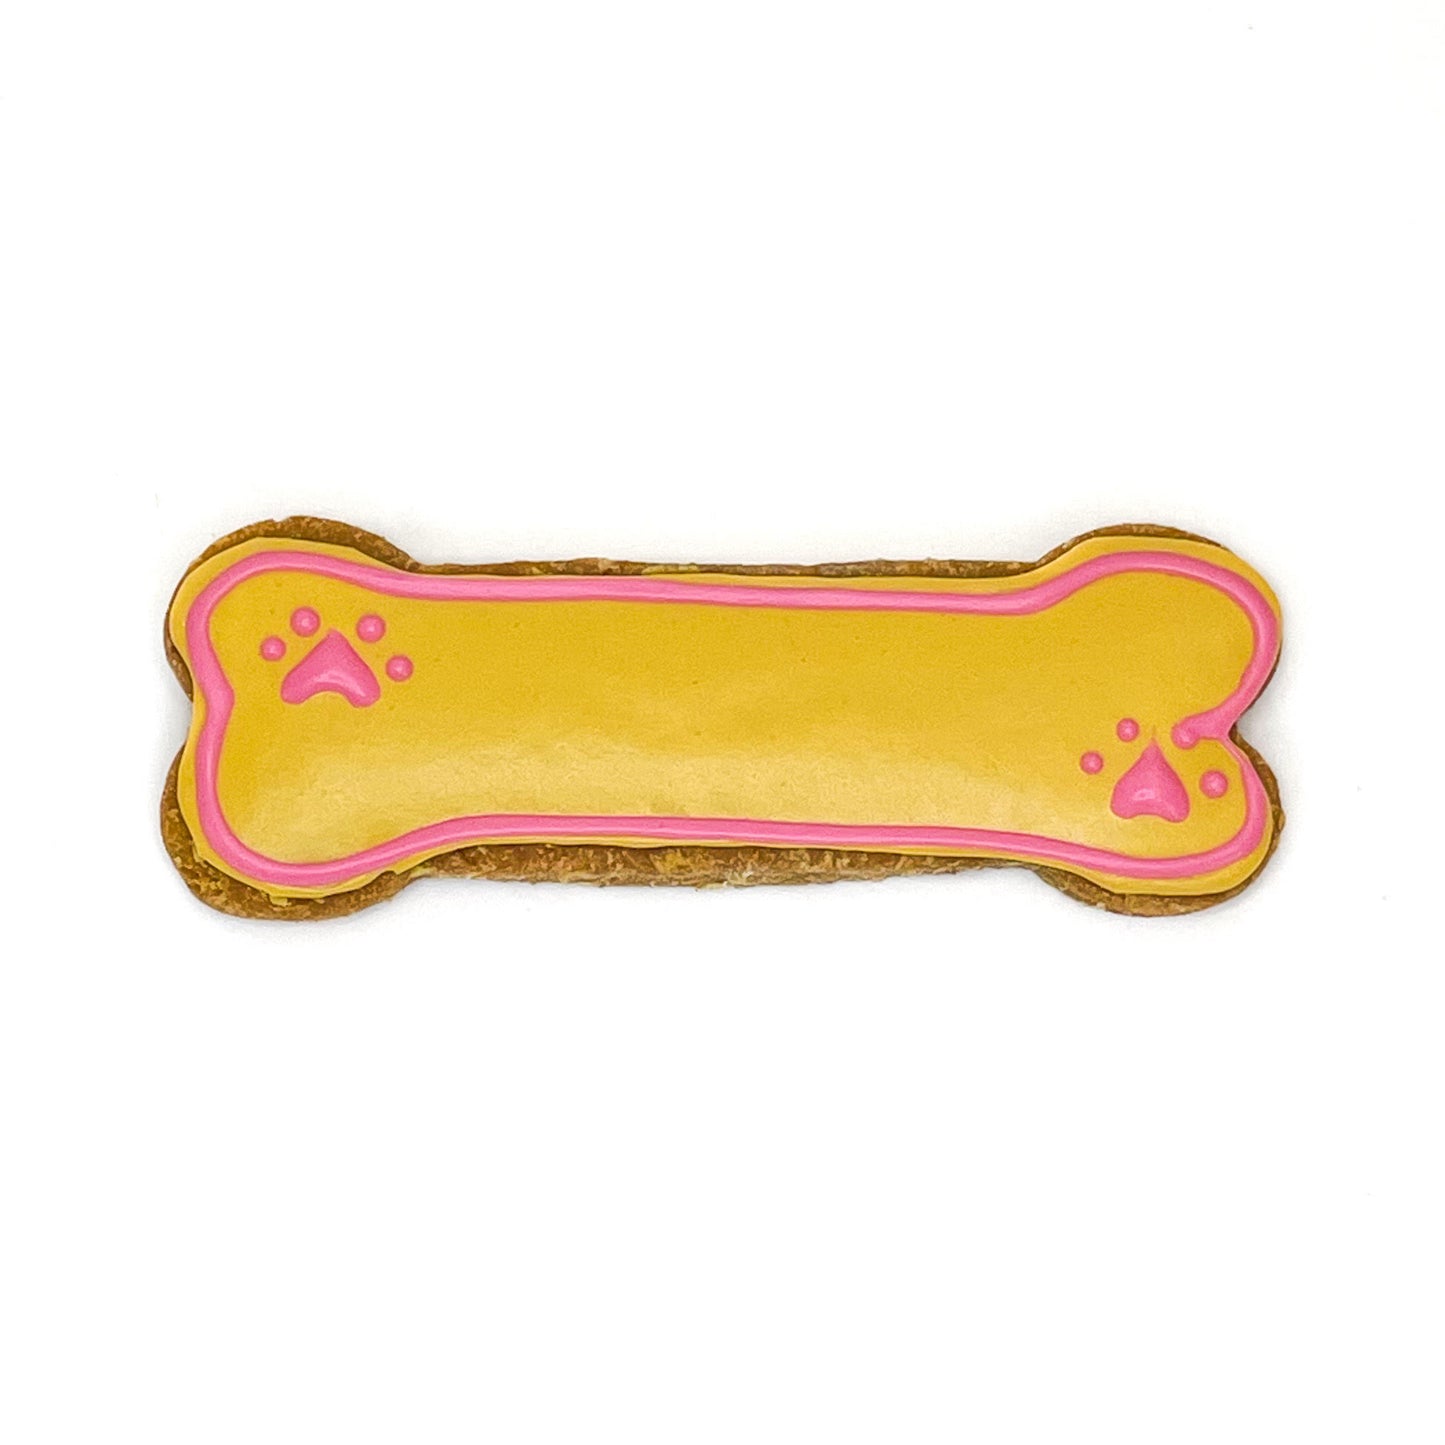 Iced Bone Pup Biscuit